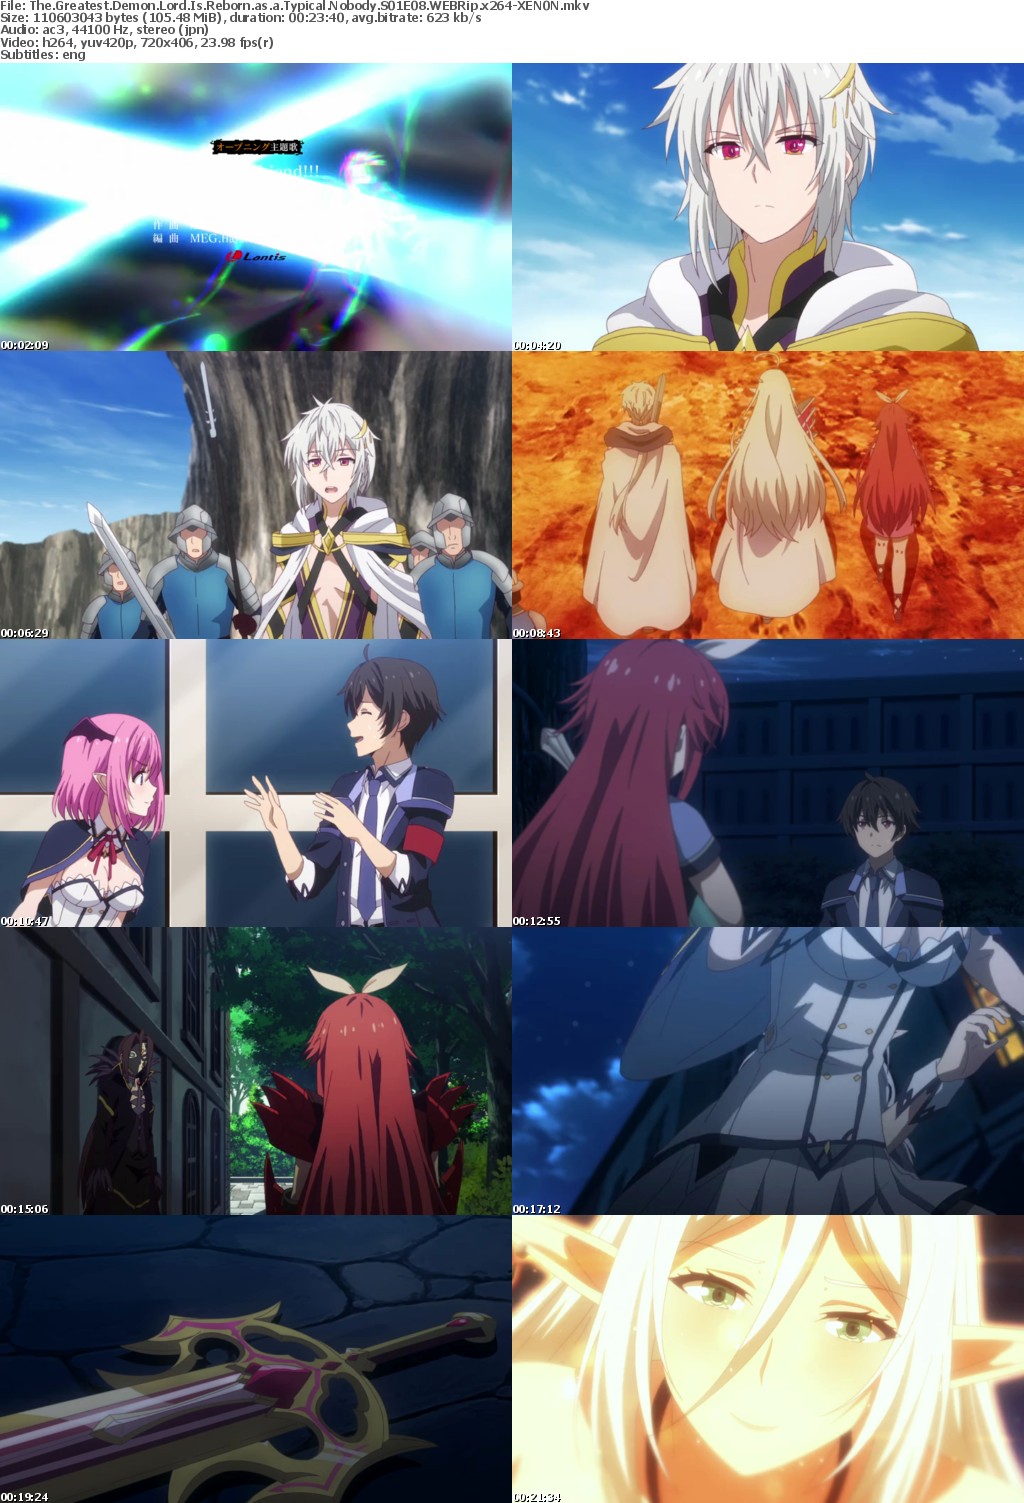 The Greatest Demon Lord Is Reborn as a Typical Nobody S01E08 WEBRip x264-XEN0N